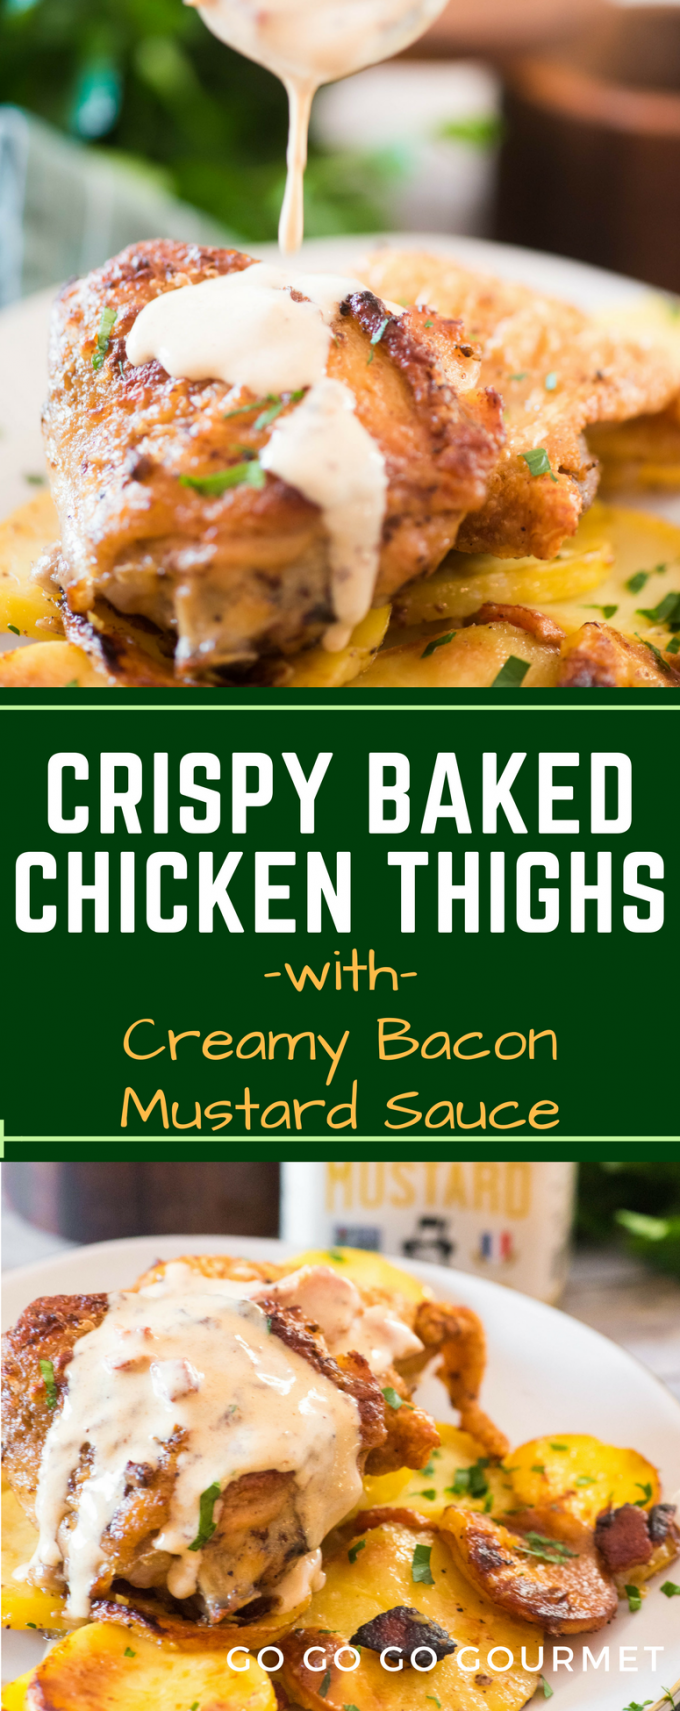 This Crispy Baked Chicken Thigh recipe is out of this world! Roasted in the oven on a sheet pan with potatoes and bacon, it gets drizzled with a creamy mustard sauce! #chicken #chickenthighs #easydinner #bacon #gogogogourmet via @gogogogourmet